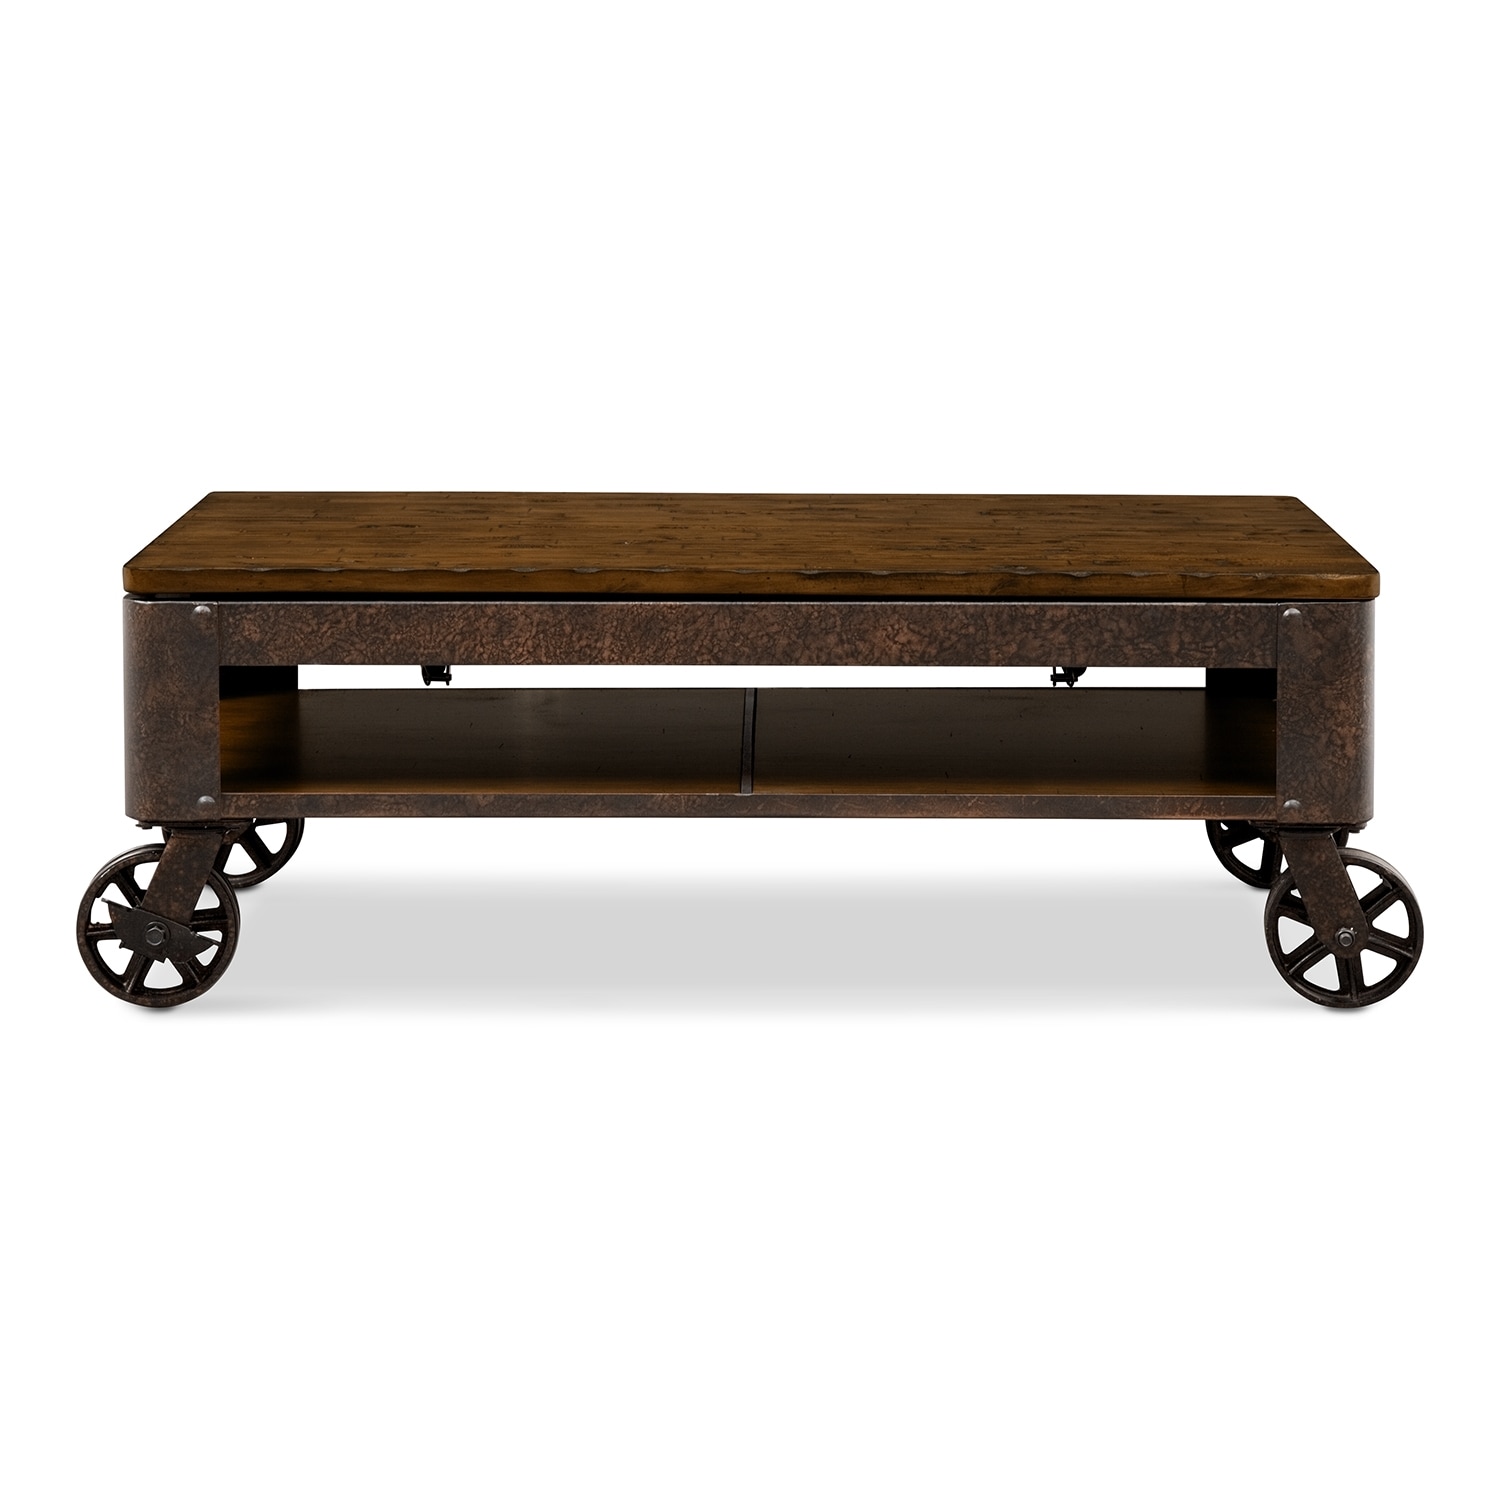 Shortline Lift Top Coffee Table American Signature Furniture